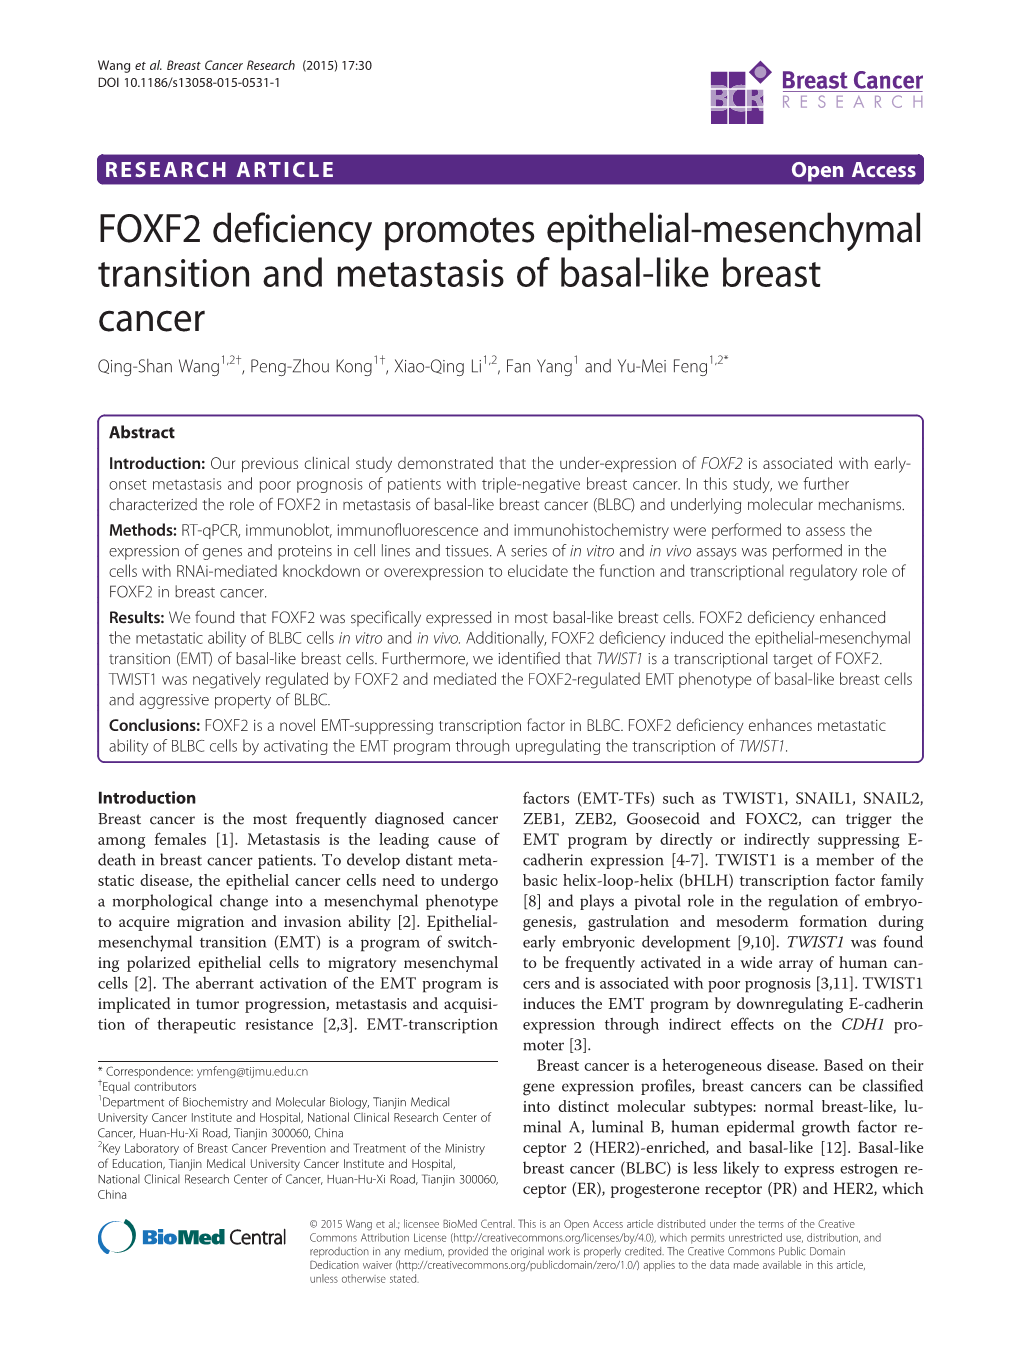 FOXF2 Deficiency Promotes Epithelial-Mesenchymal Transition and Metastasis of Basal-Like Breast Cancer